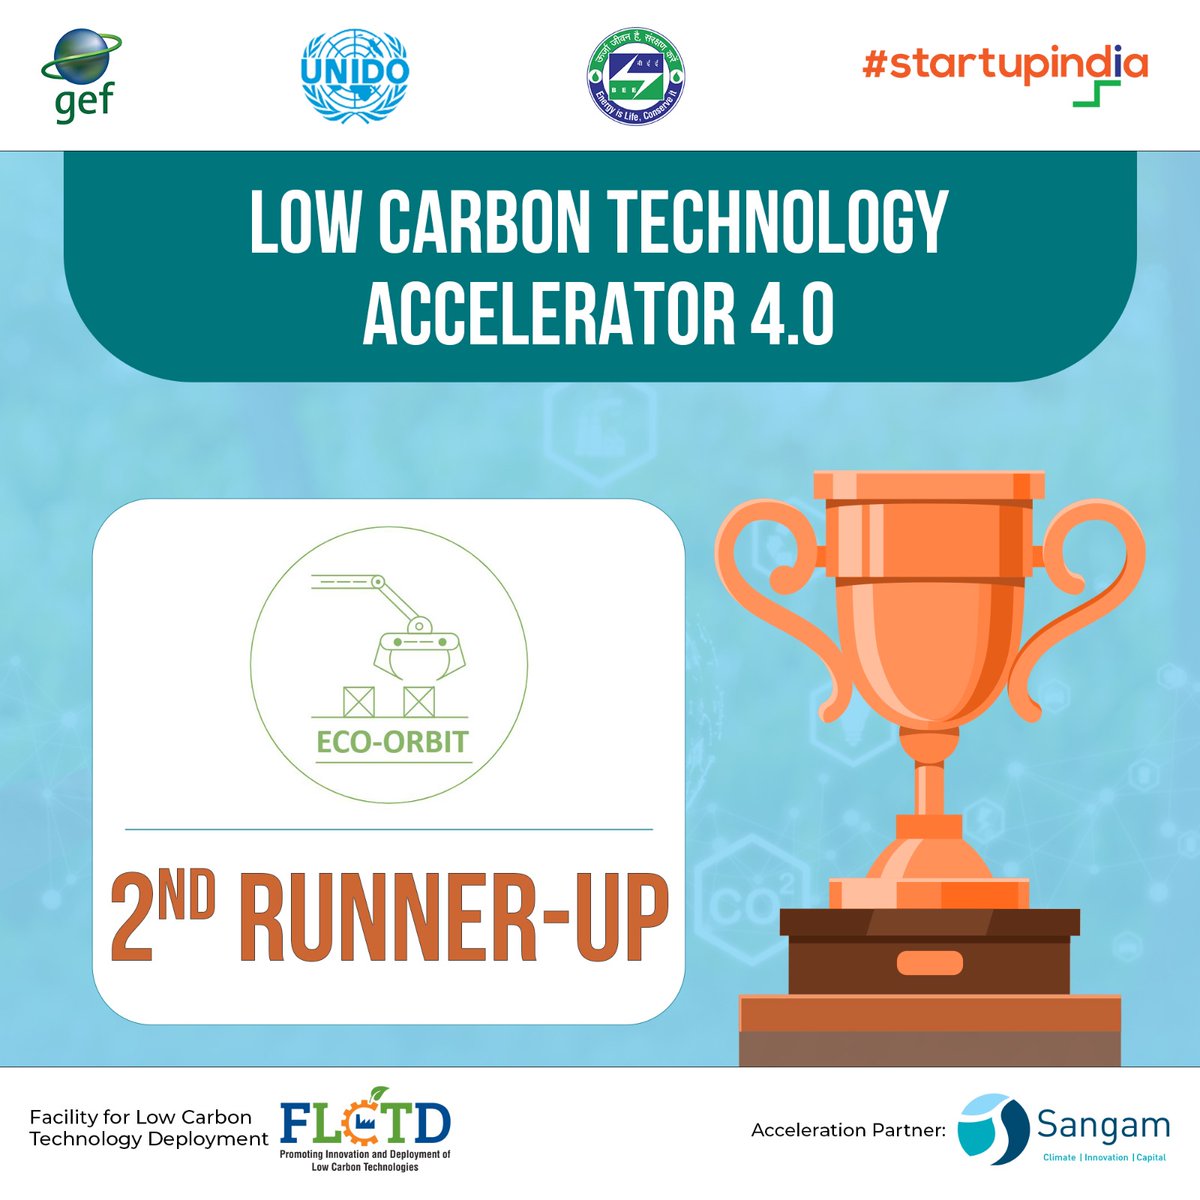 Meet the 2nd Runner-up of the #FLCTDAccelerator4!

EcoOrbit Solutions is automating #wastesegregation for a #greenereconomy!

Check them out: ecoorbitsolutions.com

#FLCTD #FLCTDAccelerator4 #winner #cleantech #minimines #climatetech #cleantechnology #climatechange